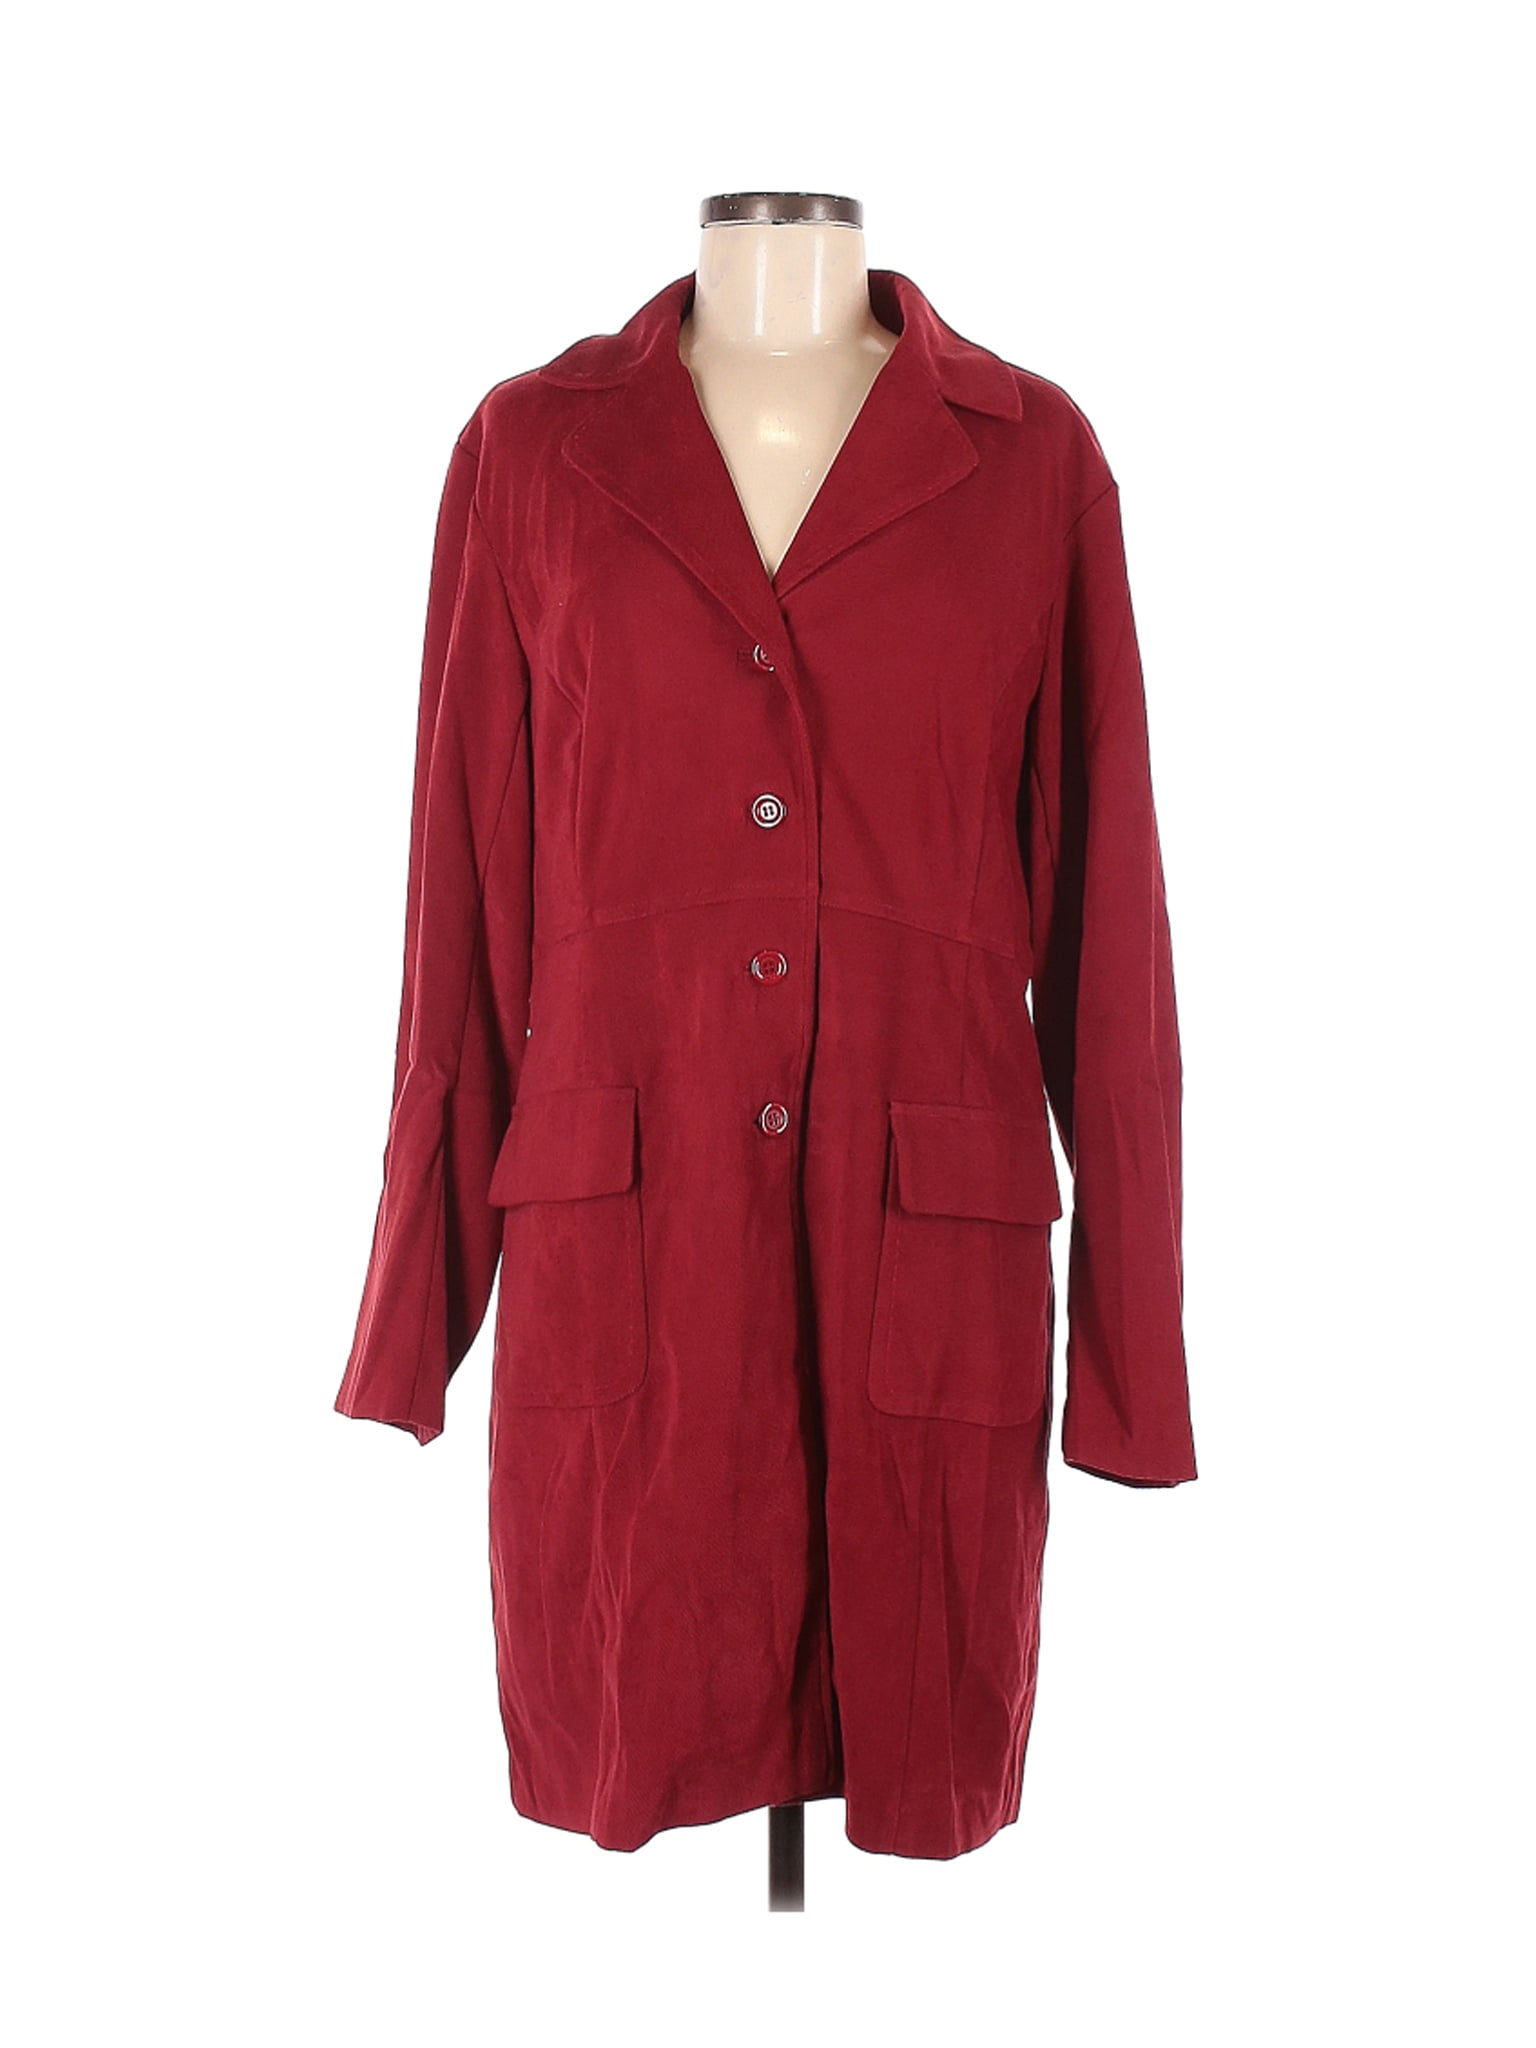 TravelSmith - Pre-Owned Travelsmith Women's Size L Coat - Walmart.com ...